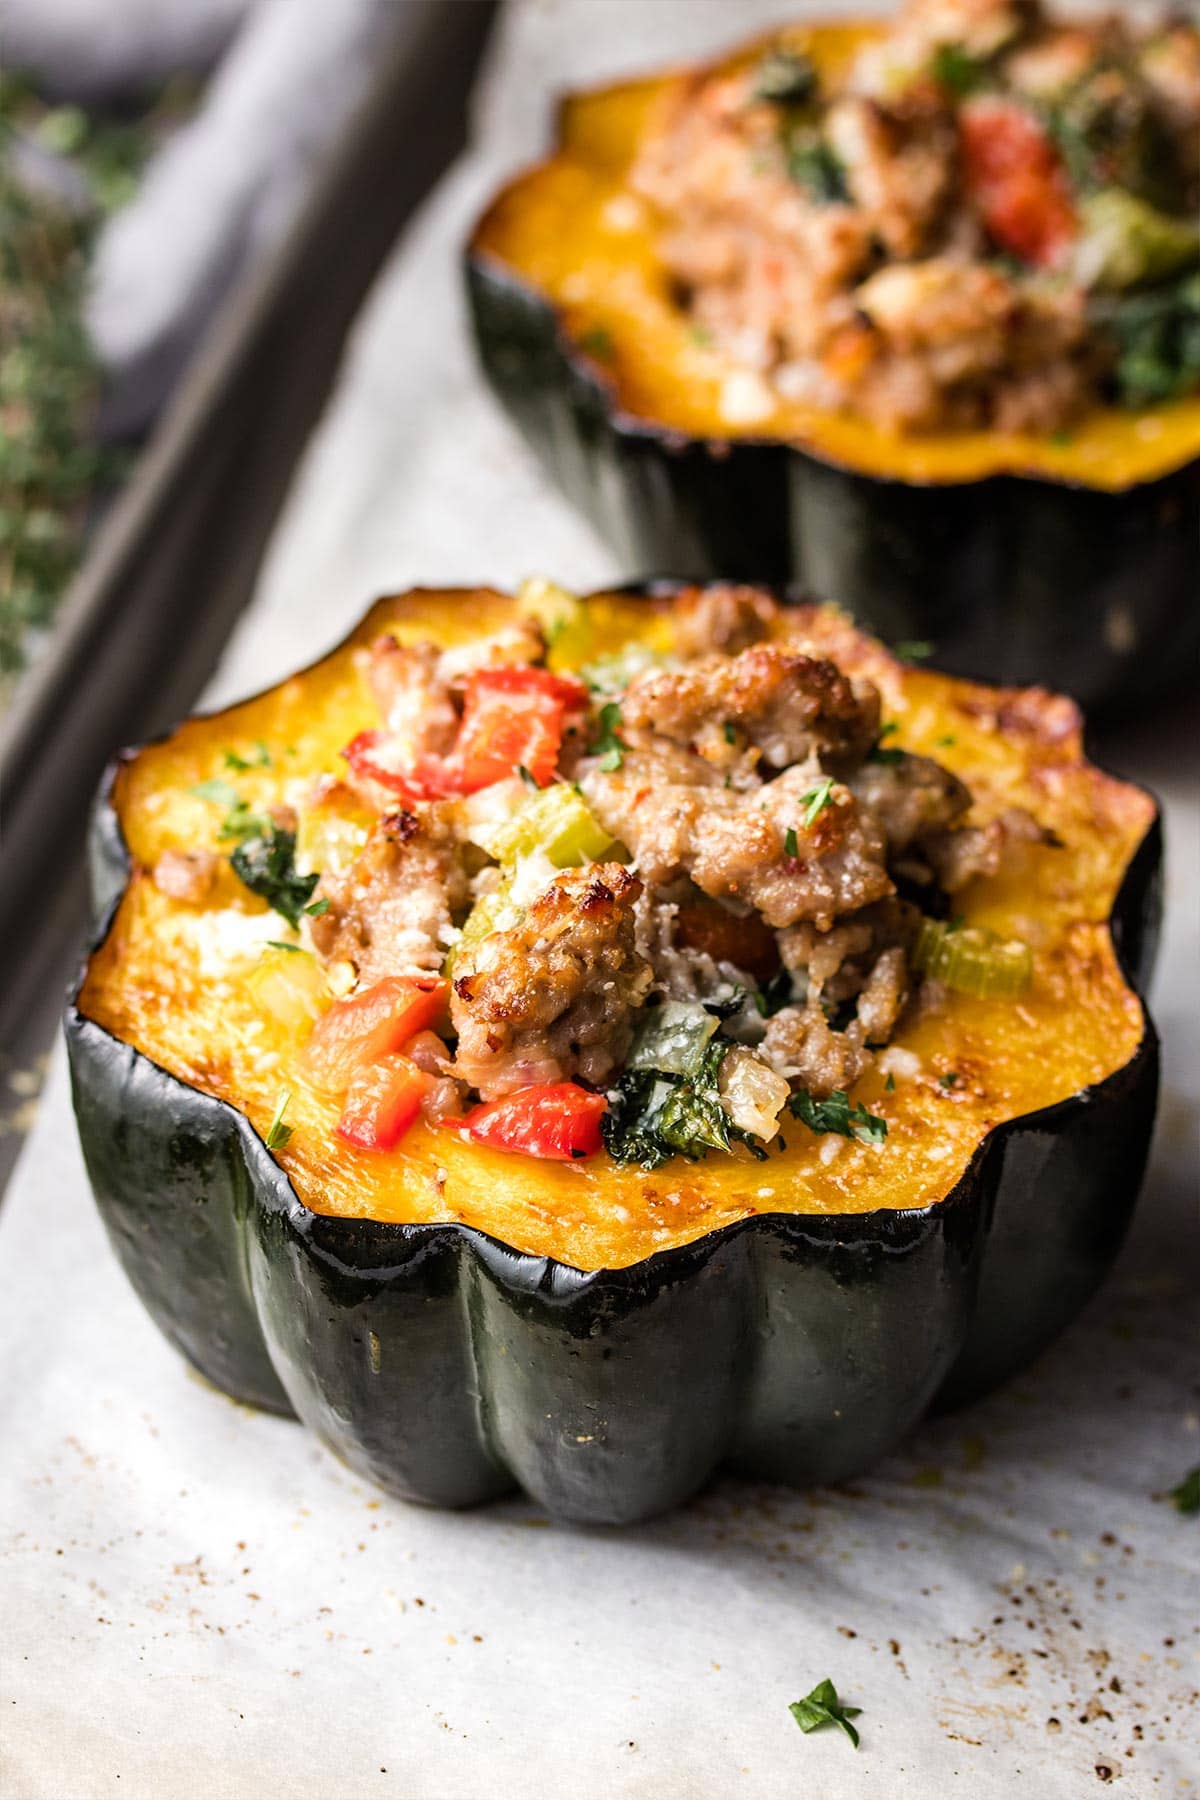 Sausage stuffed acorn squash on a parchment-lined baking tray.